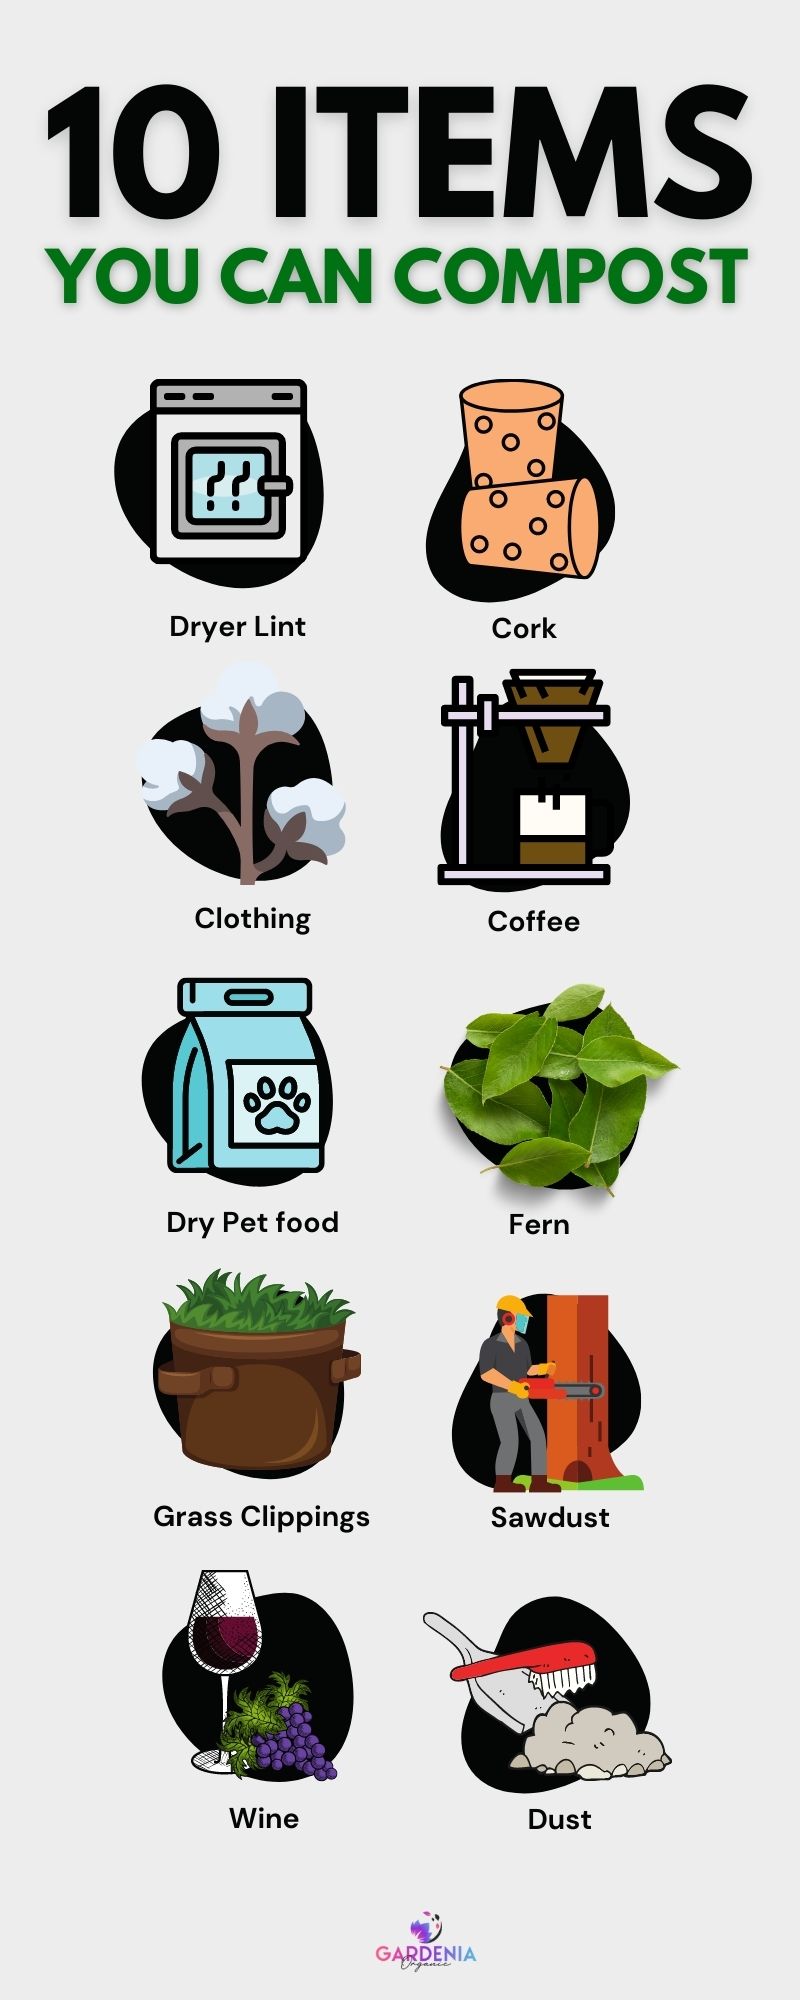 Best things for composting